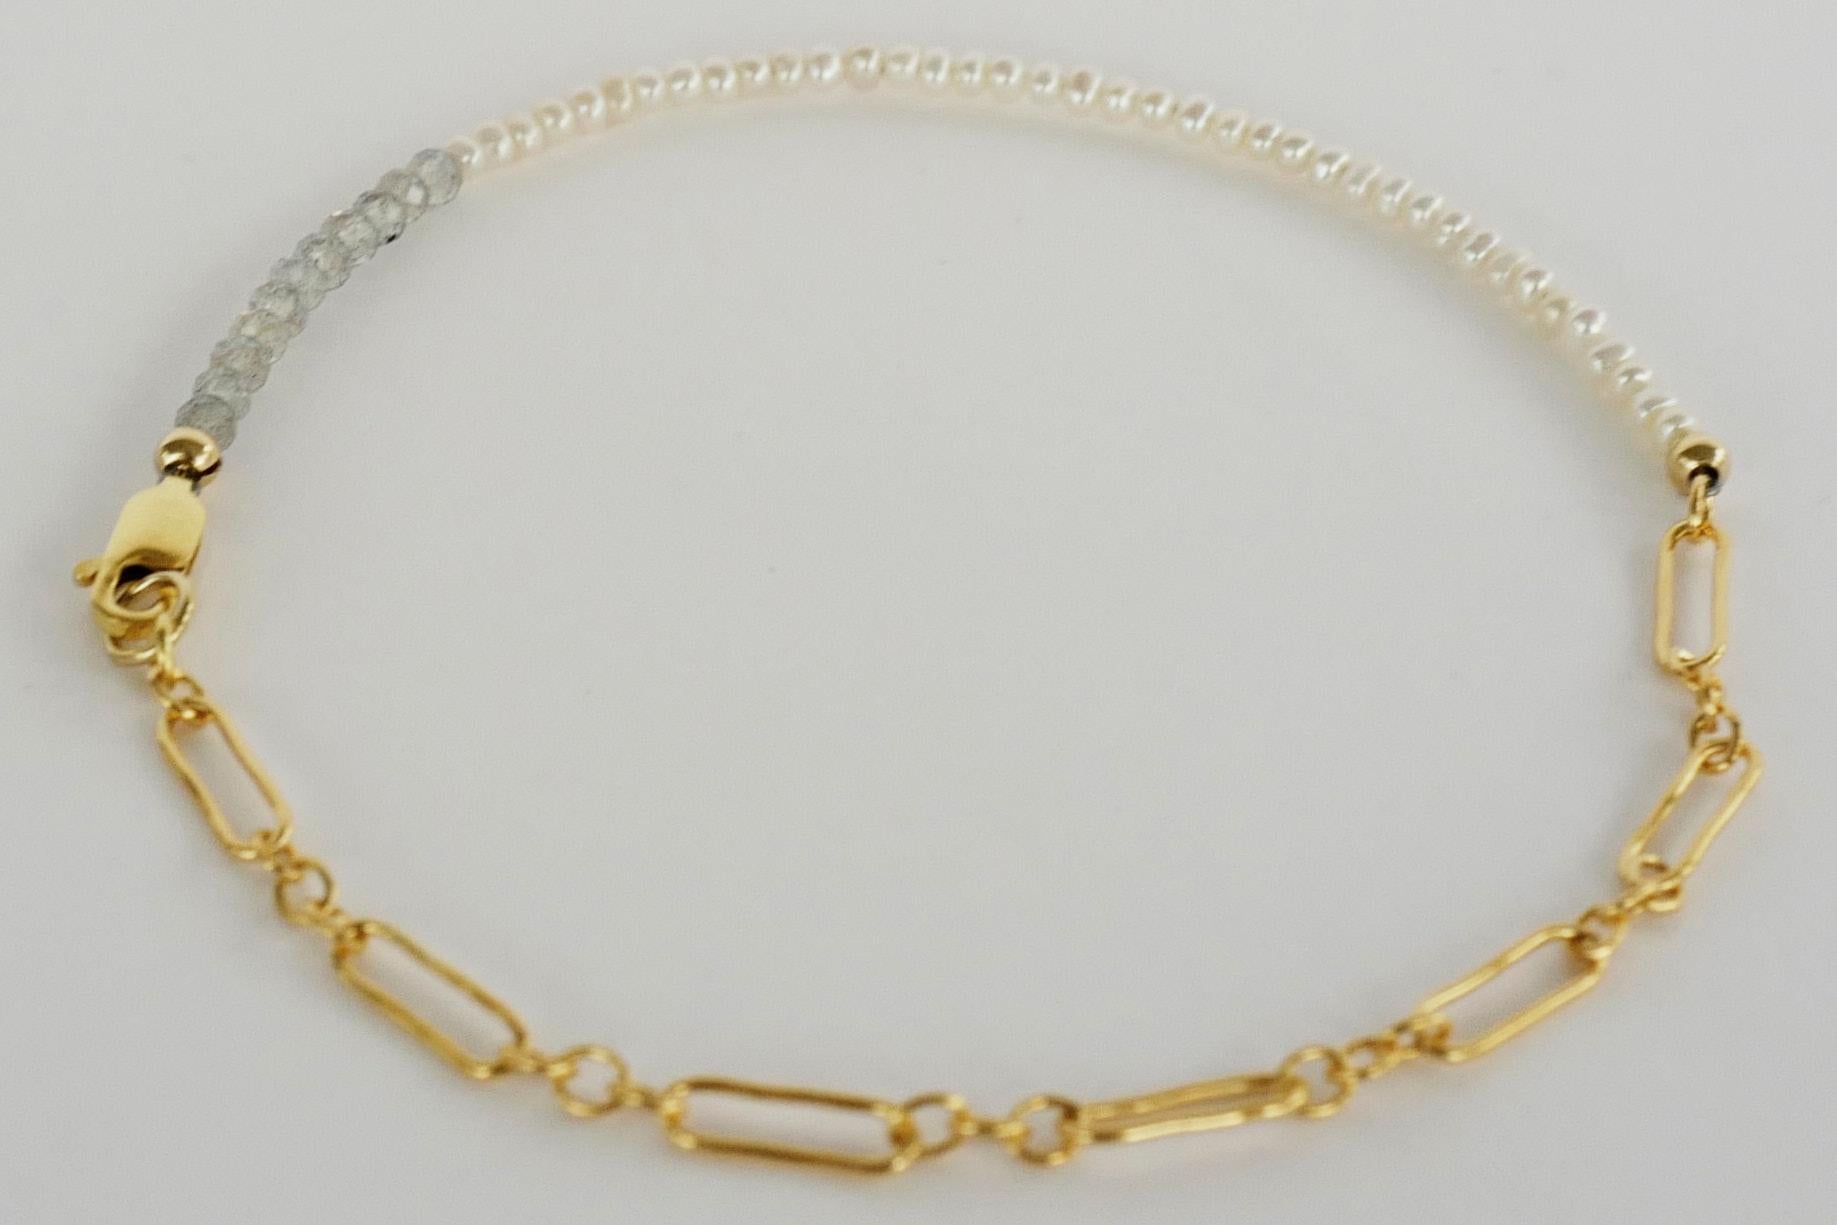 Round Cut White Pearl Necklace labradorite Gold Tone Chain Beaded Choker J Dauphin For Sale